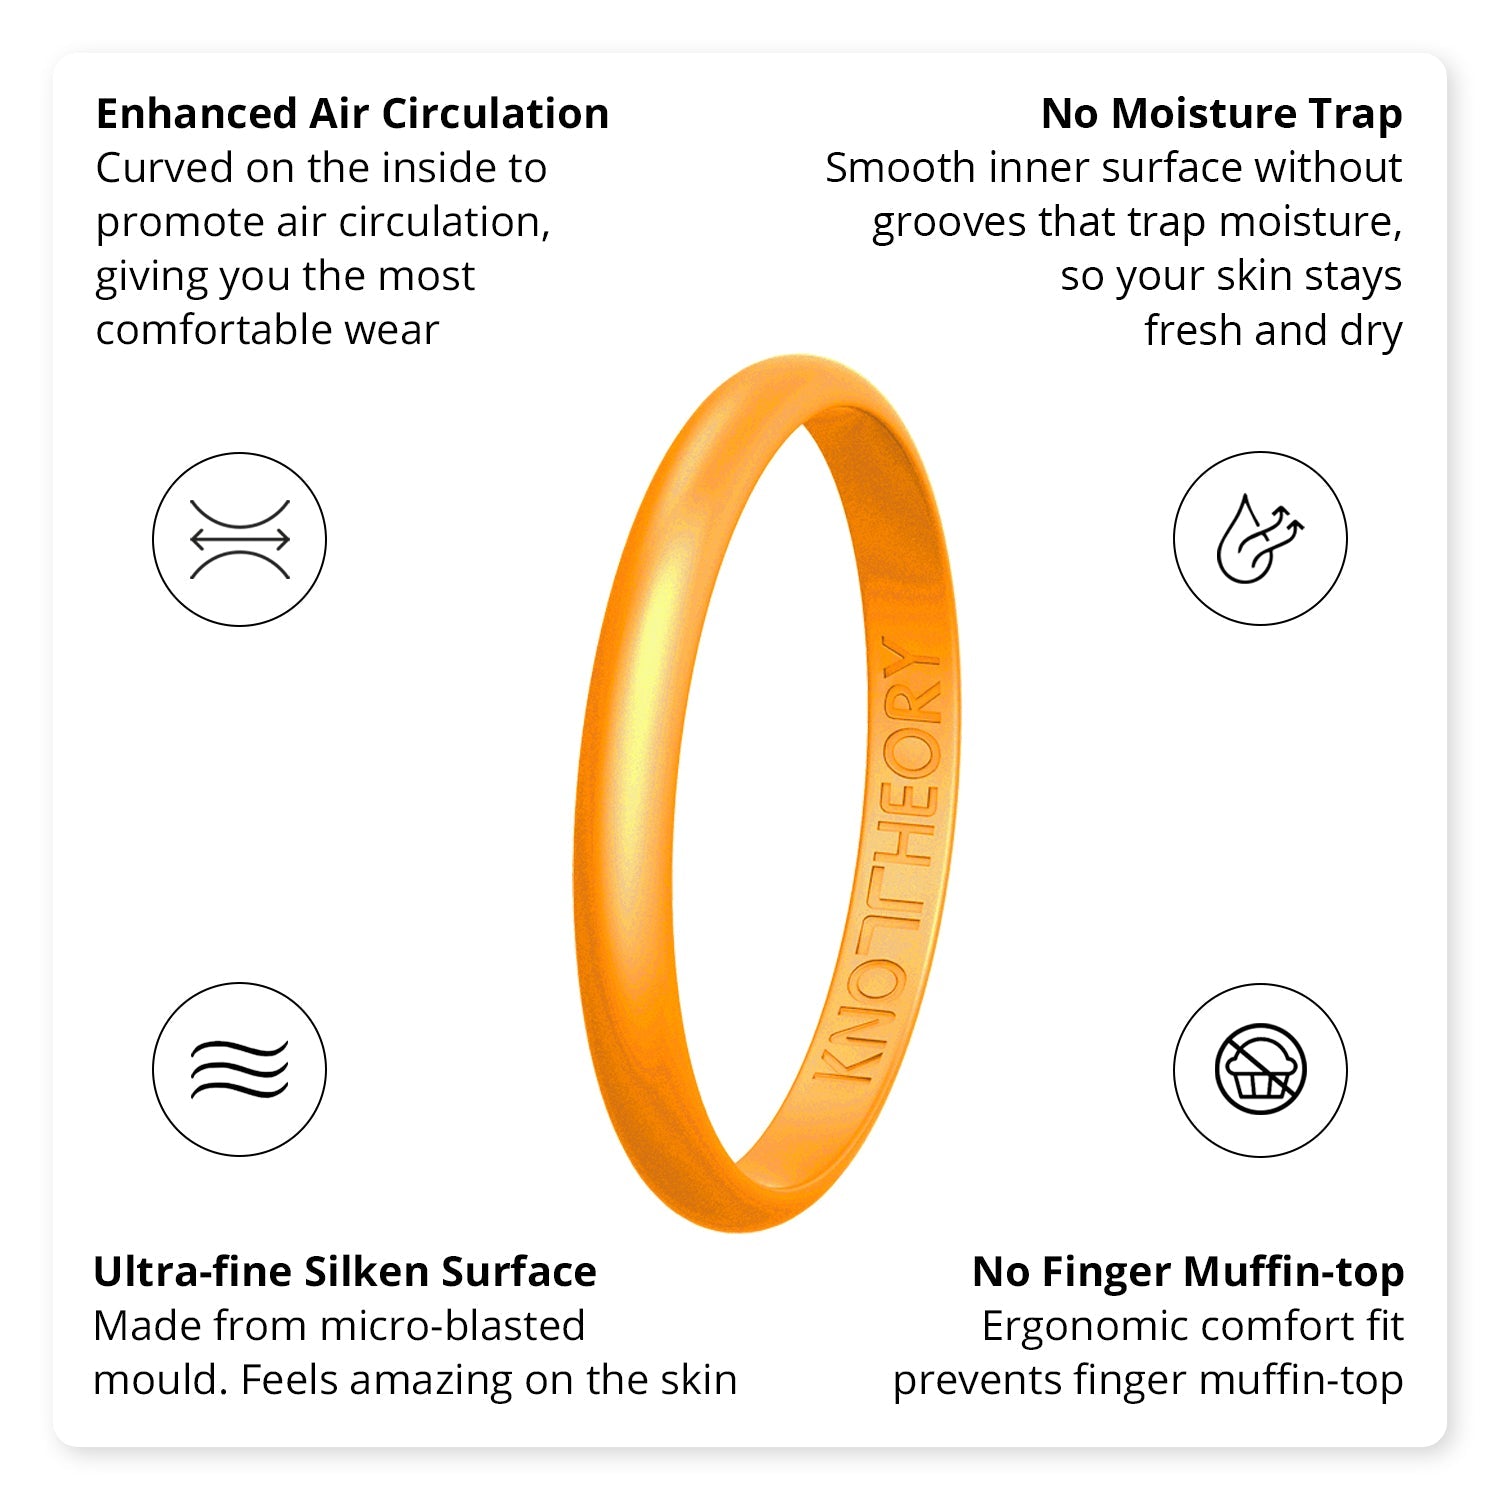 Pearl Orange Soda Stackable Slim Thin Silicone Ring for Women - Knot Theory